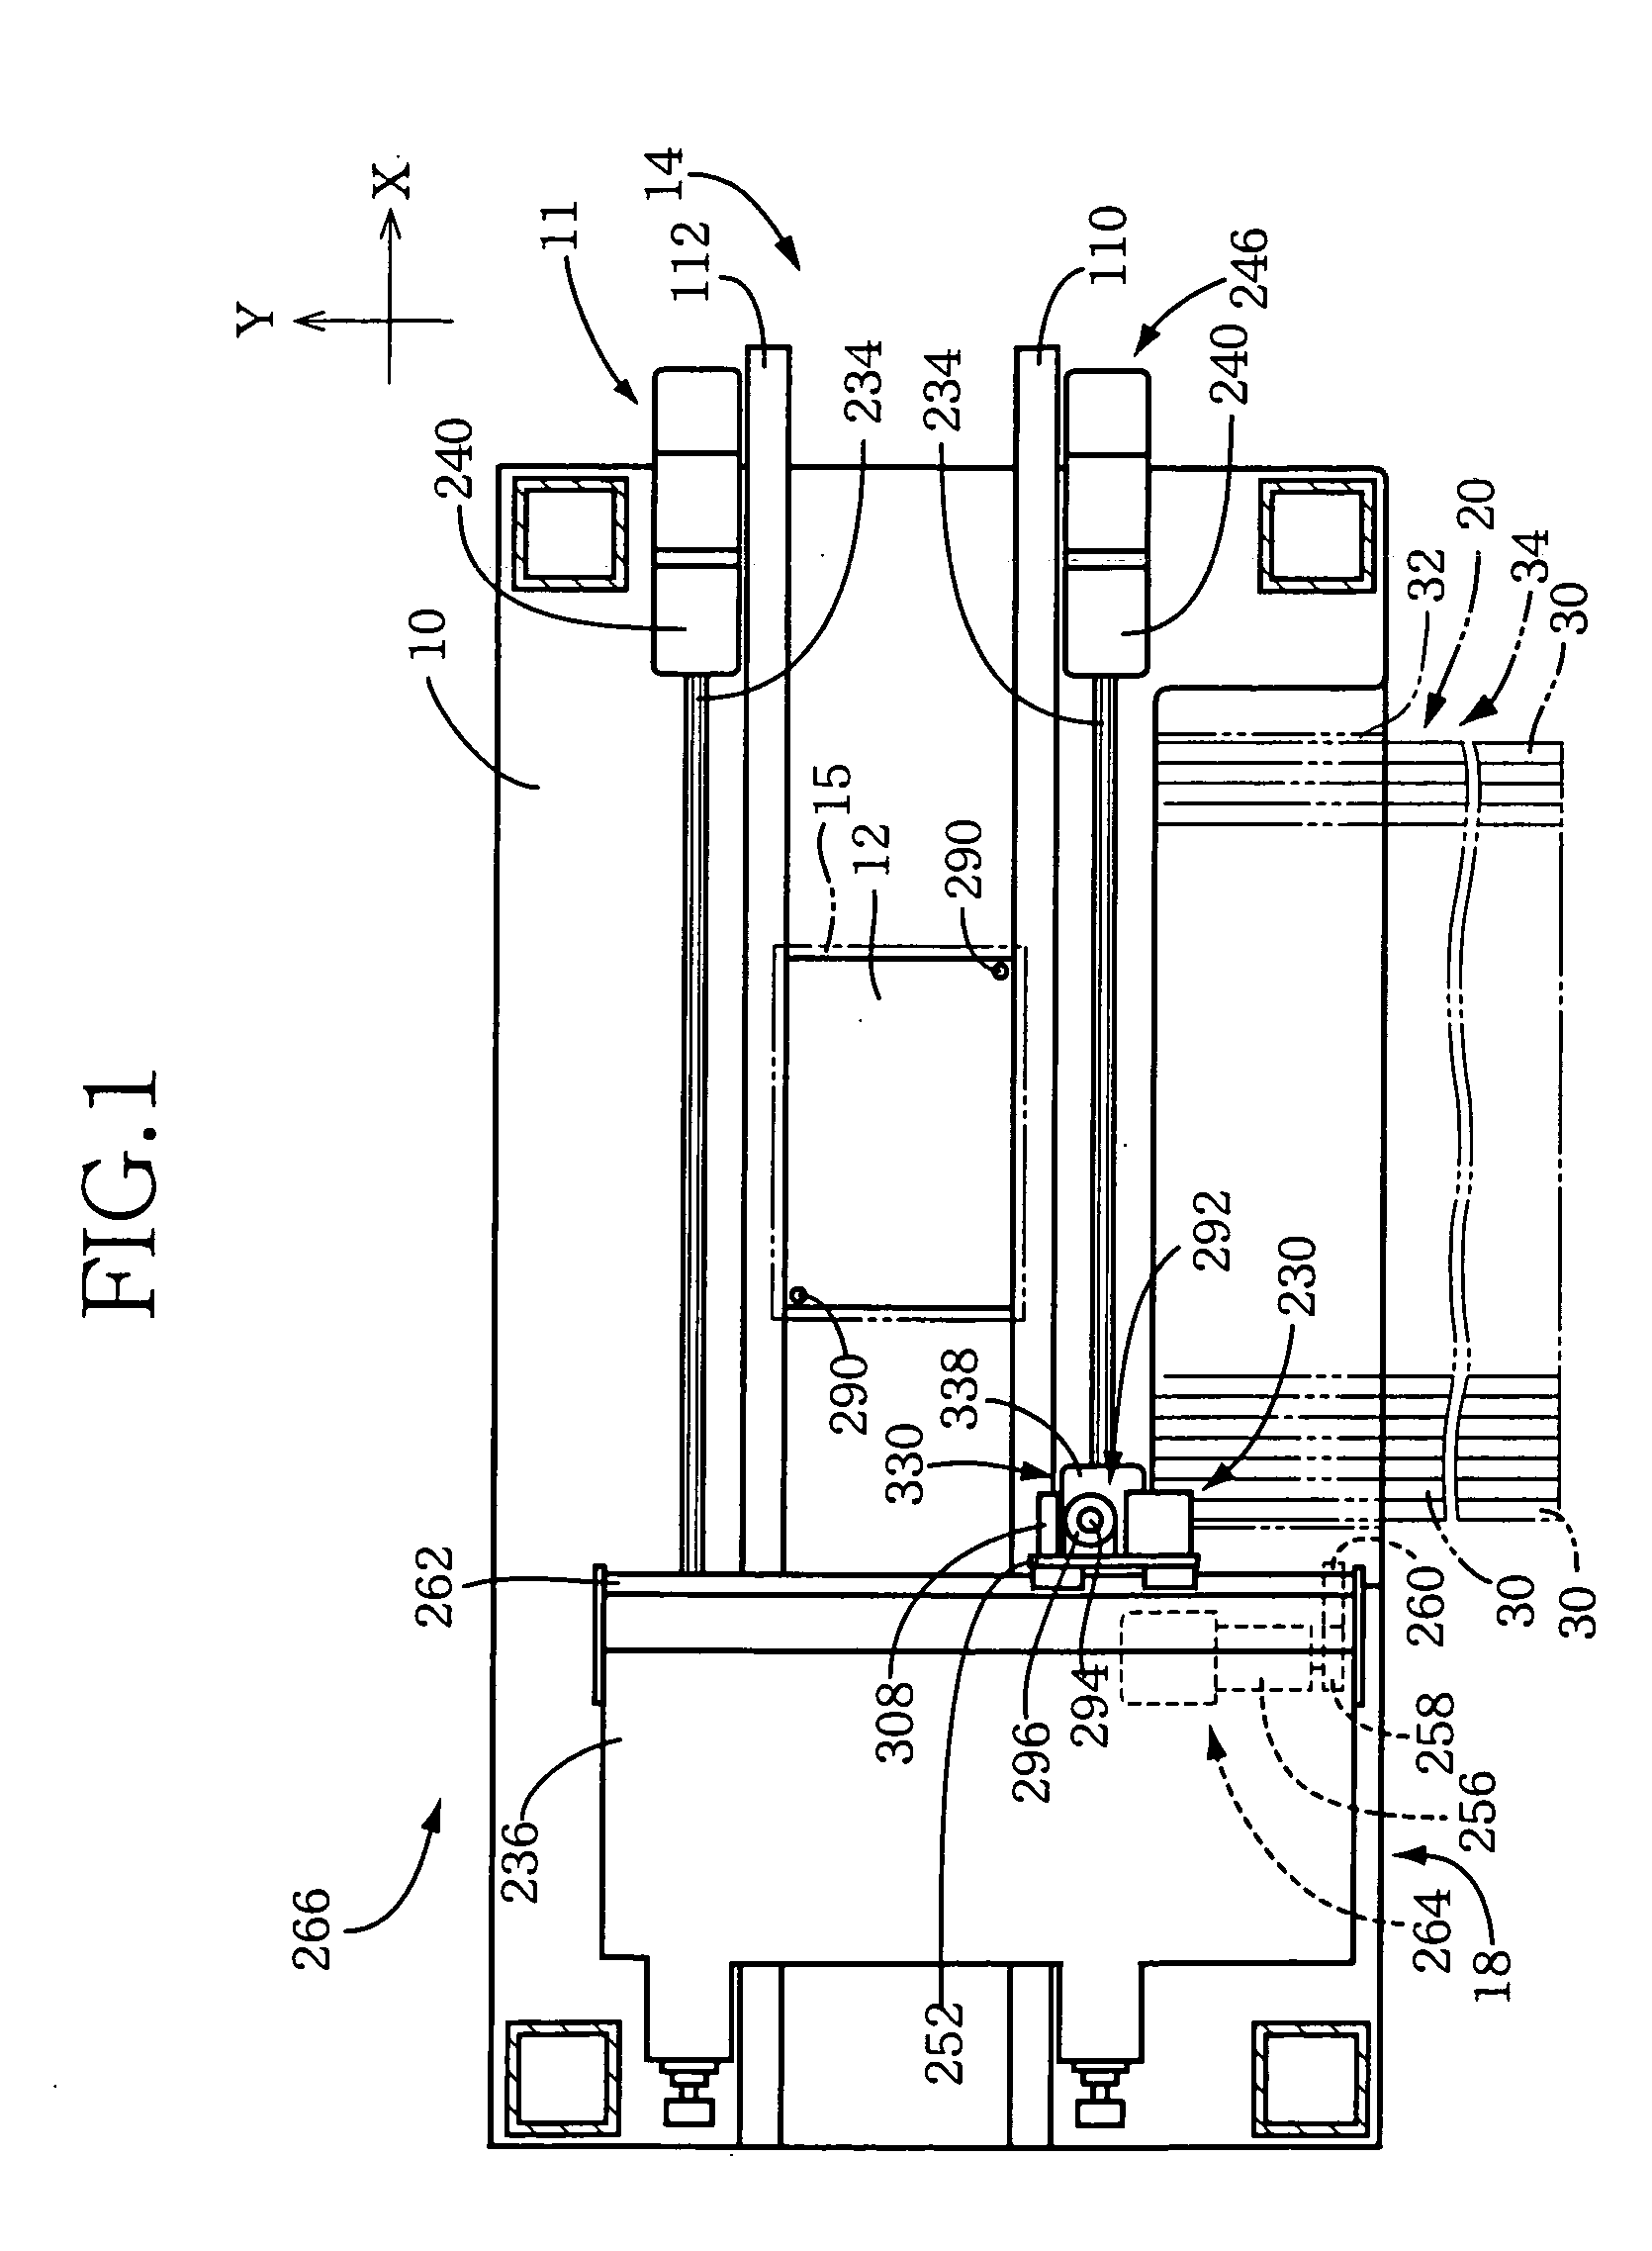 Working system for substrate